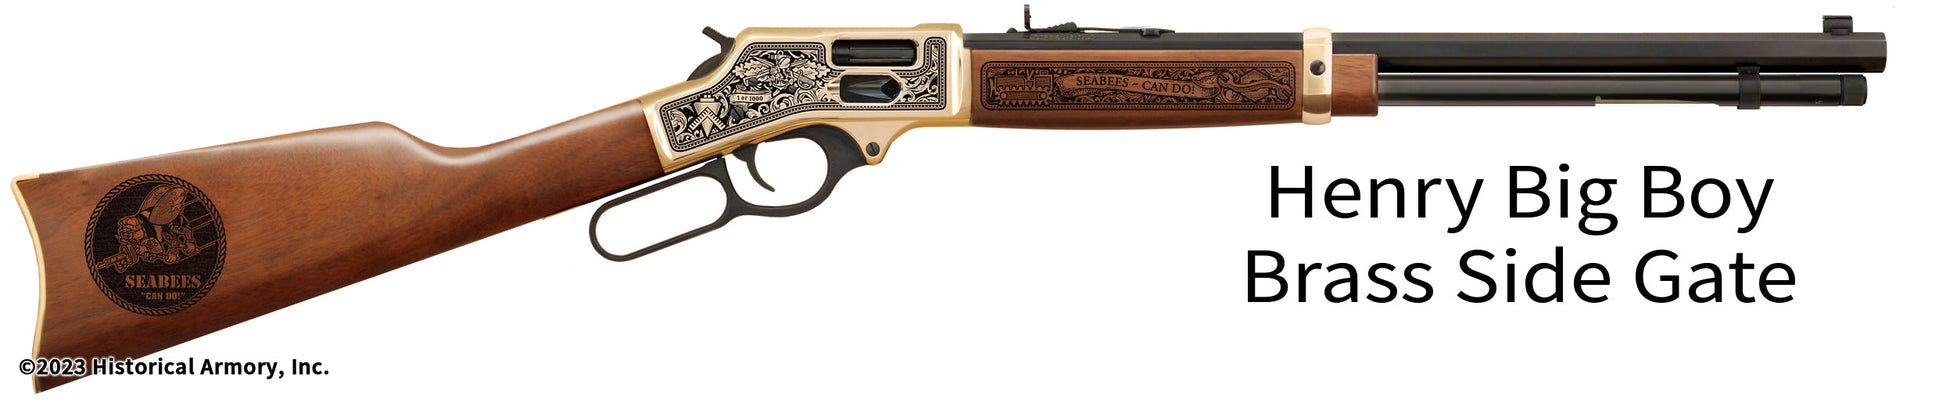 Navy Seabees Limited Edition Engraved Big Boy Brass Side Gate Rifle